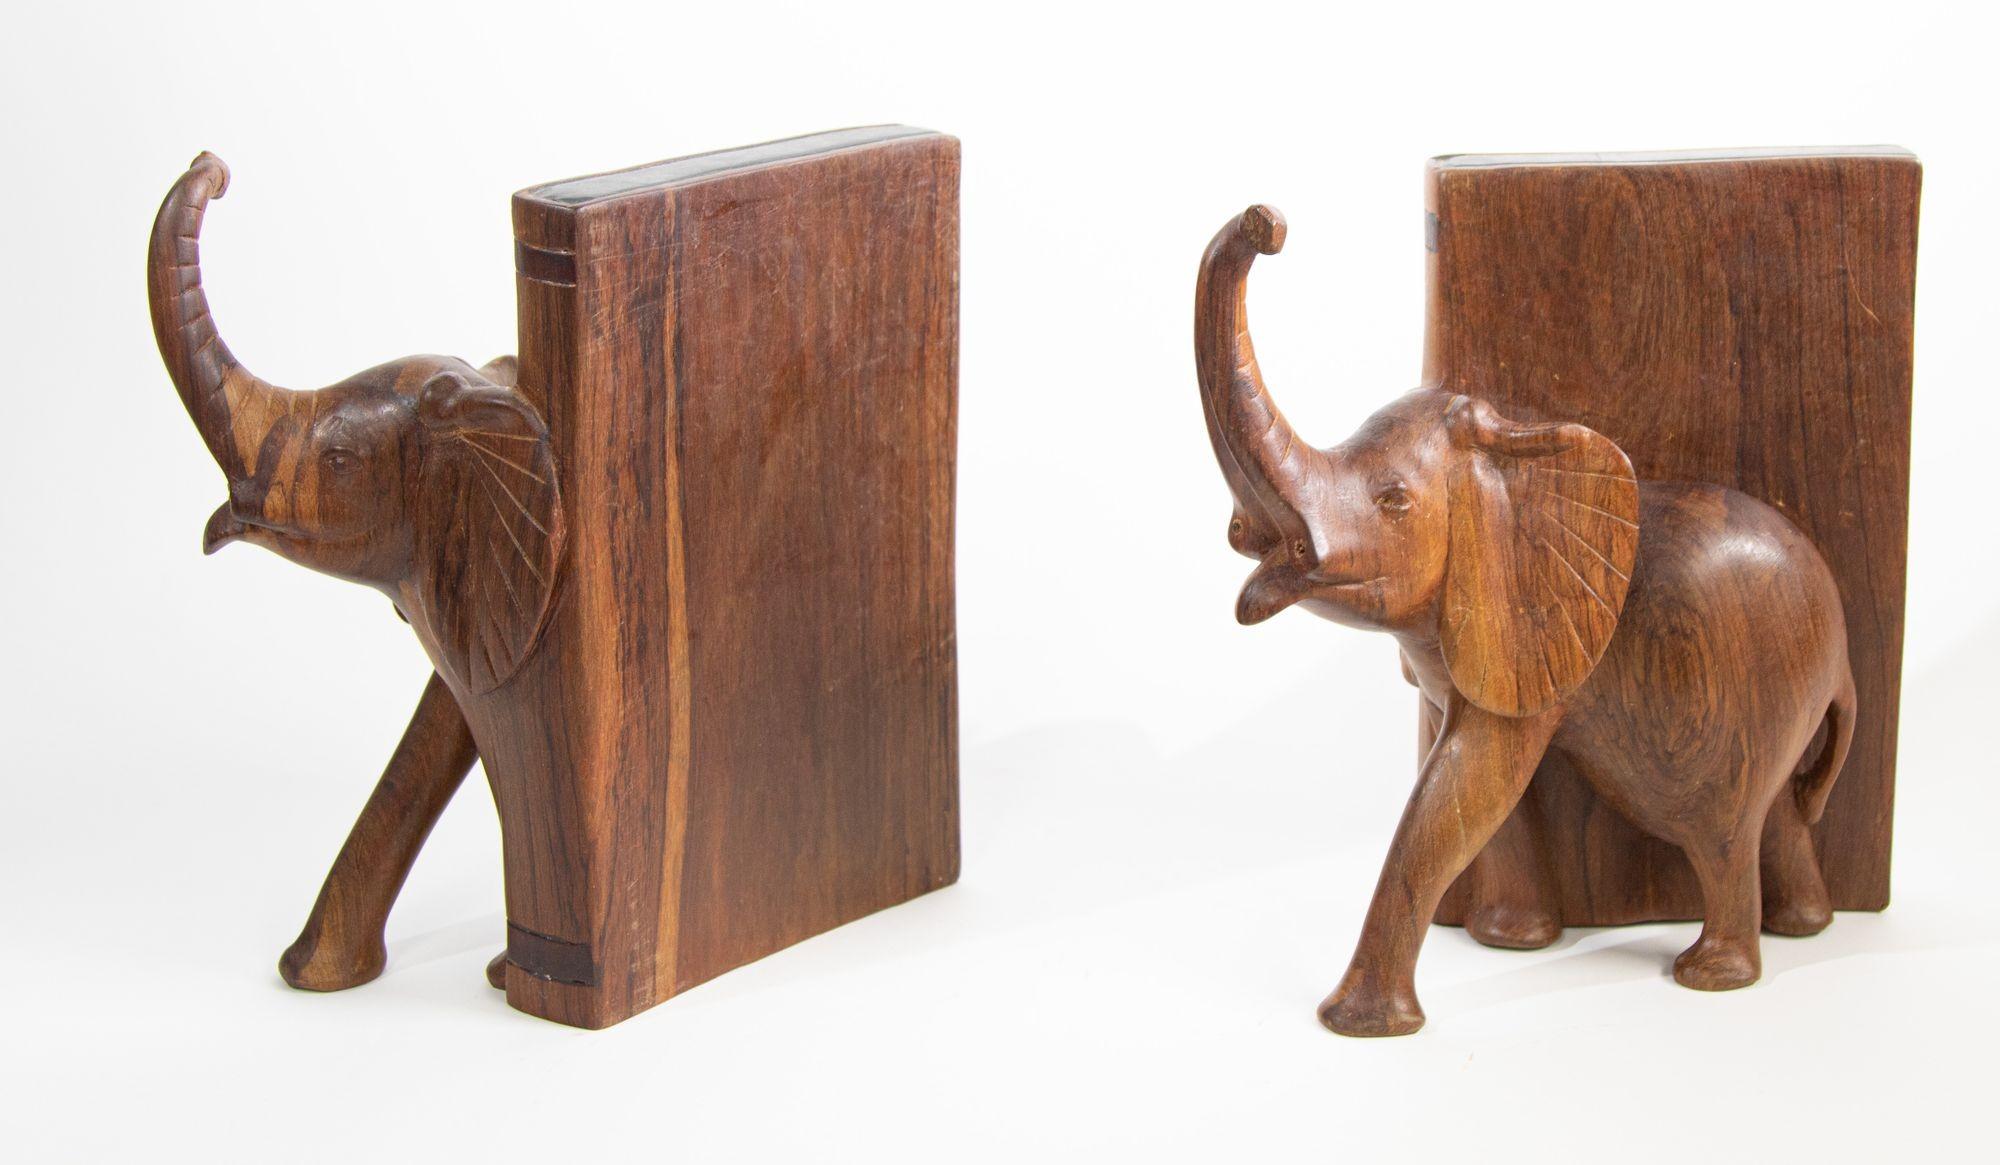 wooden elephant bookends